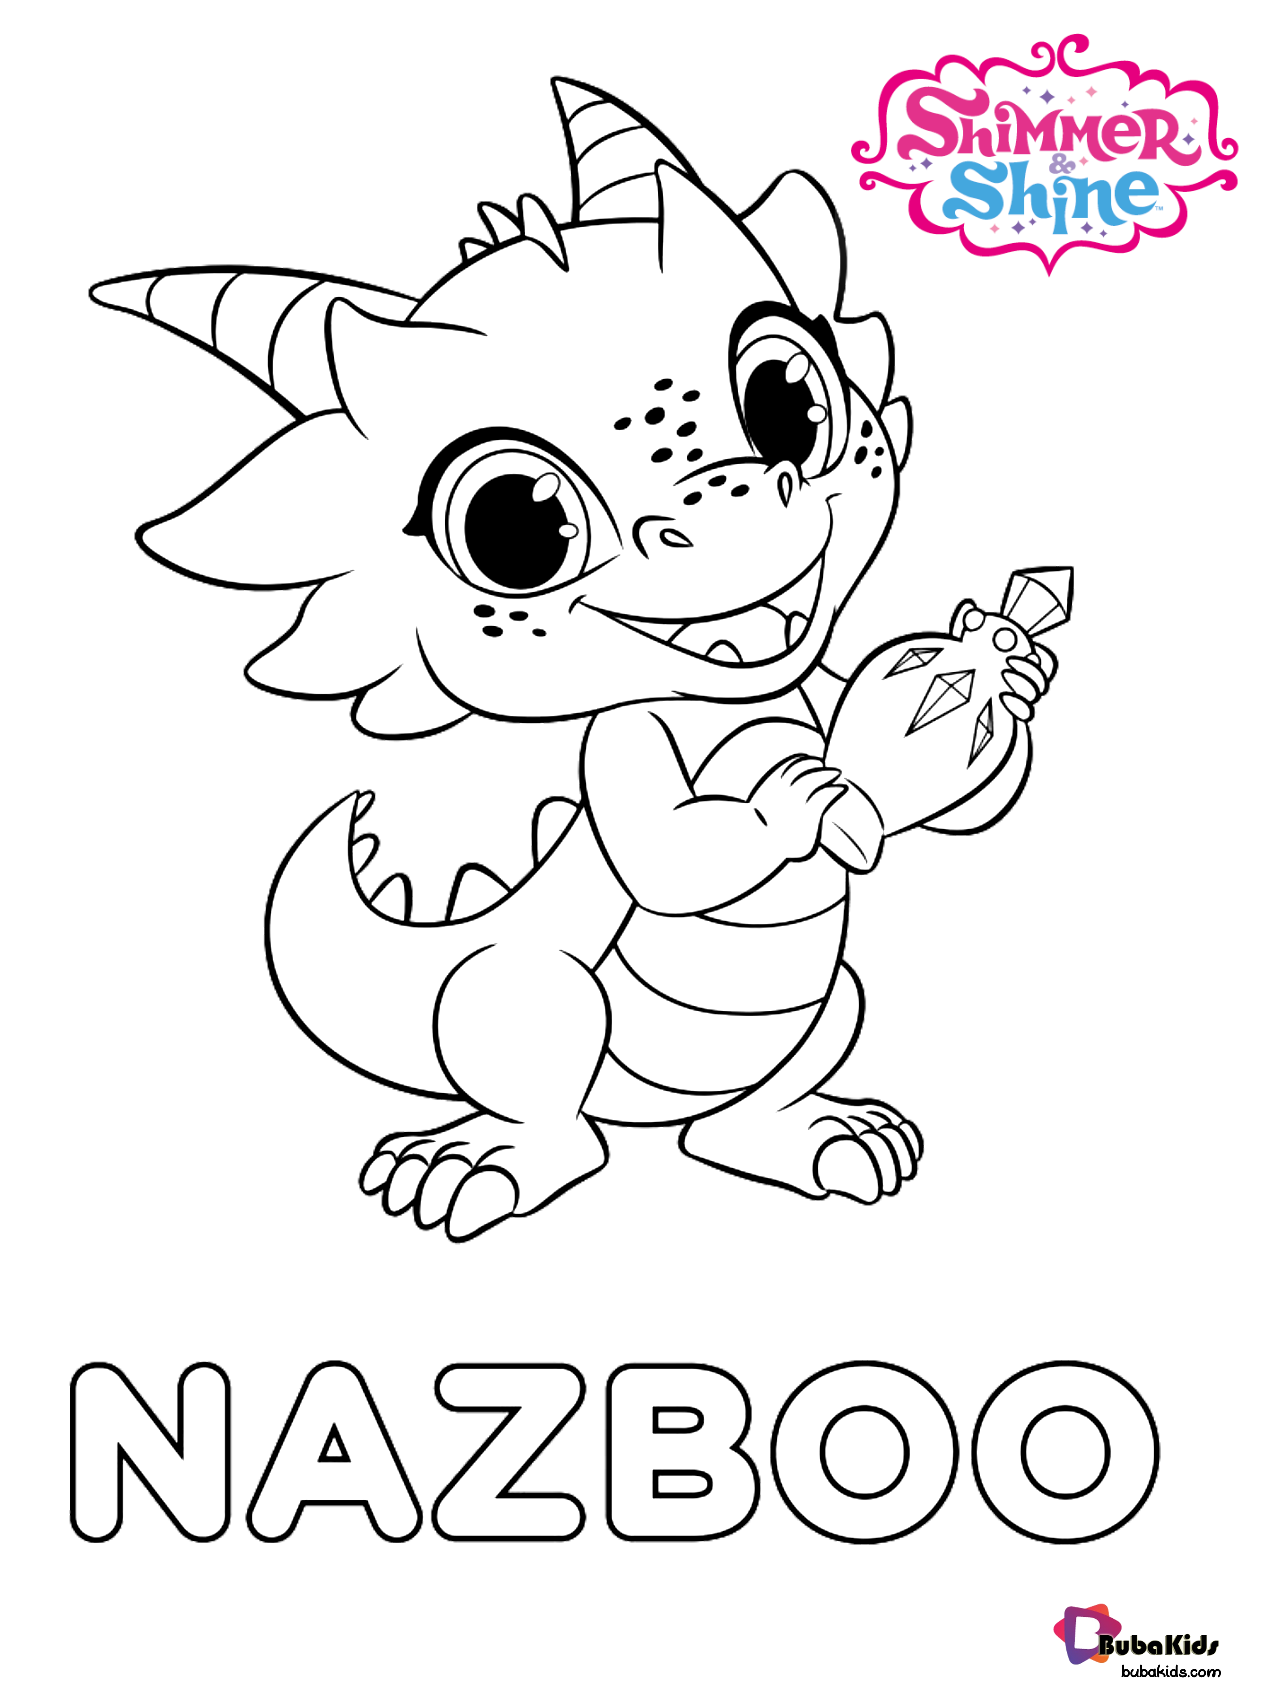 Nazboo pet dragon in Shimmer and Shine coloring page Wallpaper